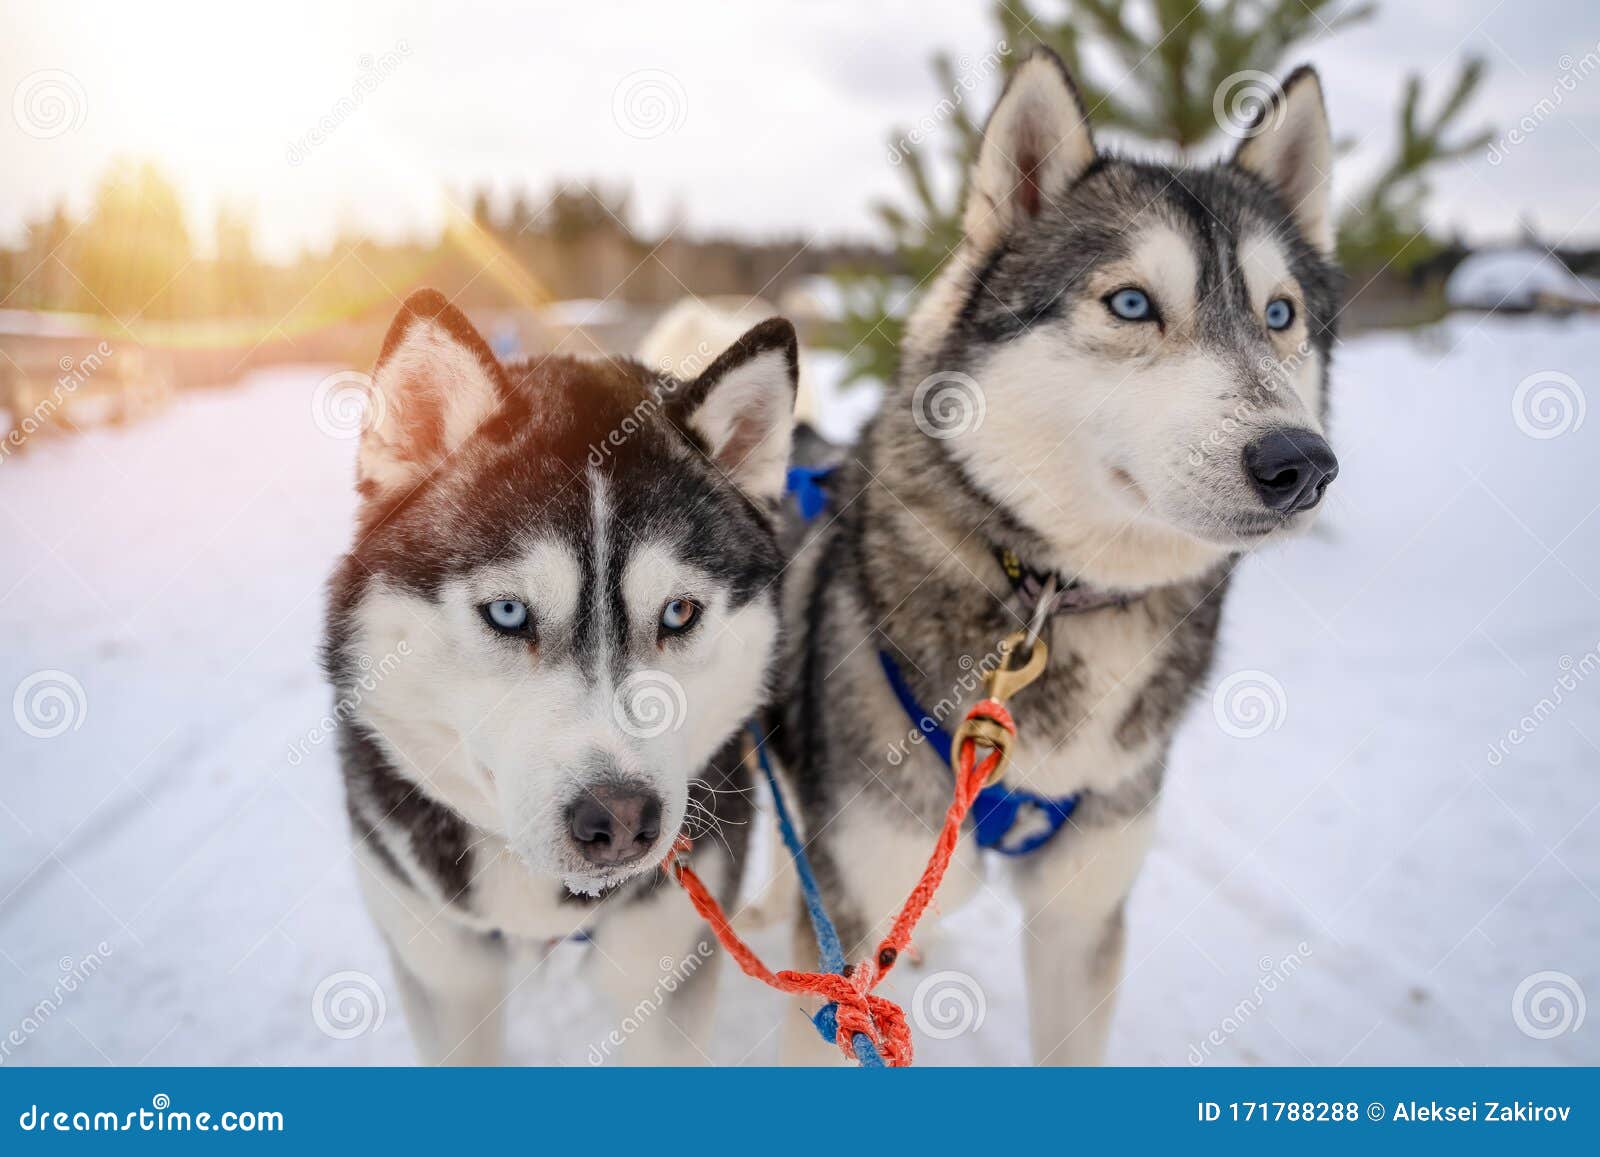 Two Siberian Husky Dogs Looks Forward Sitting On The Snowy Shore Frozen River Husky Dogs Black Brown And White Coat Stock Photo Image Of Canine Siberian 171788288